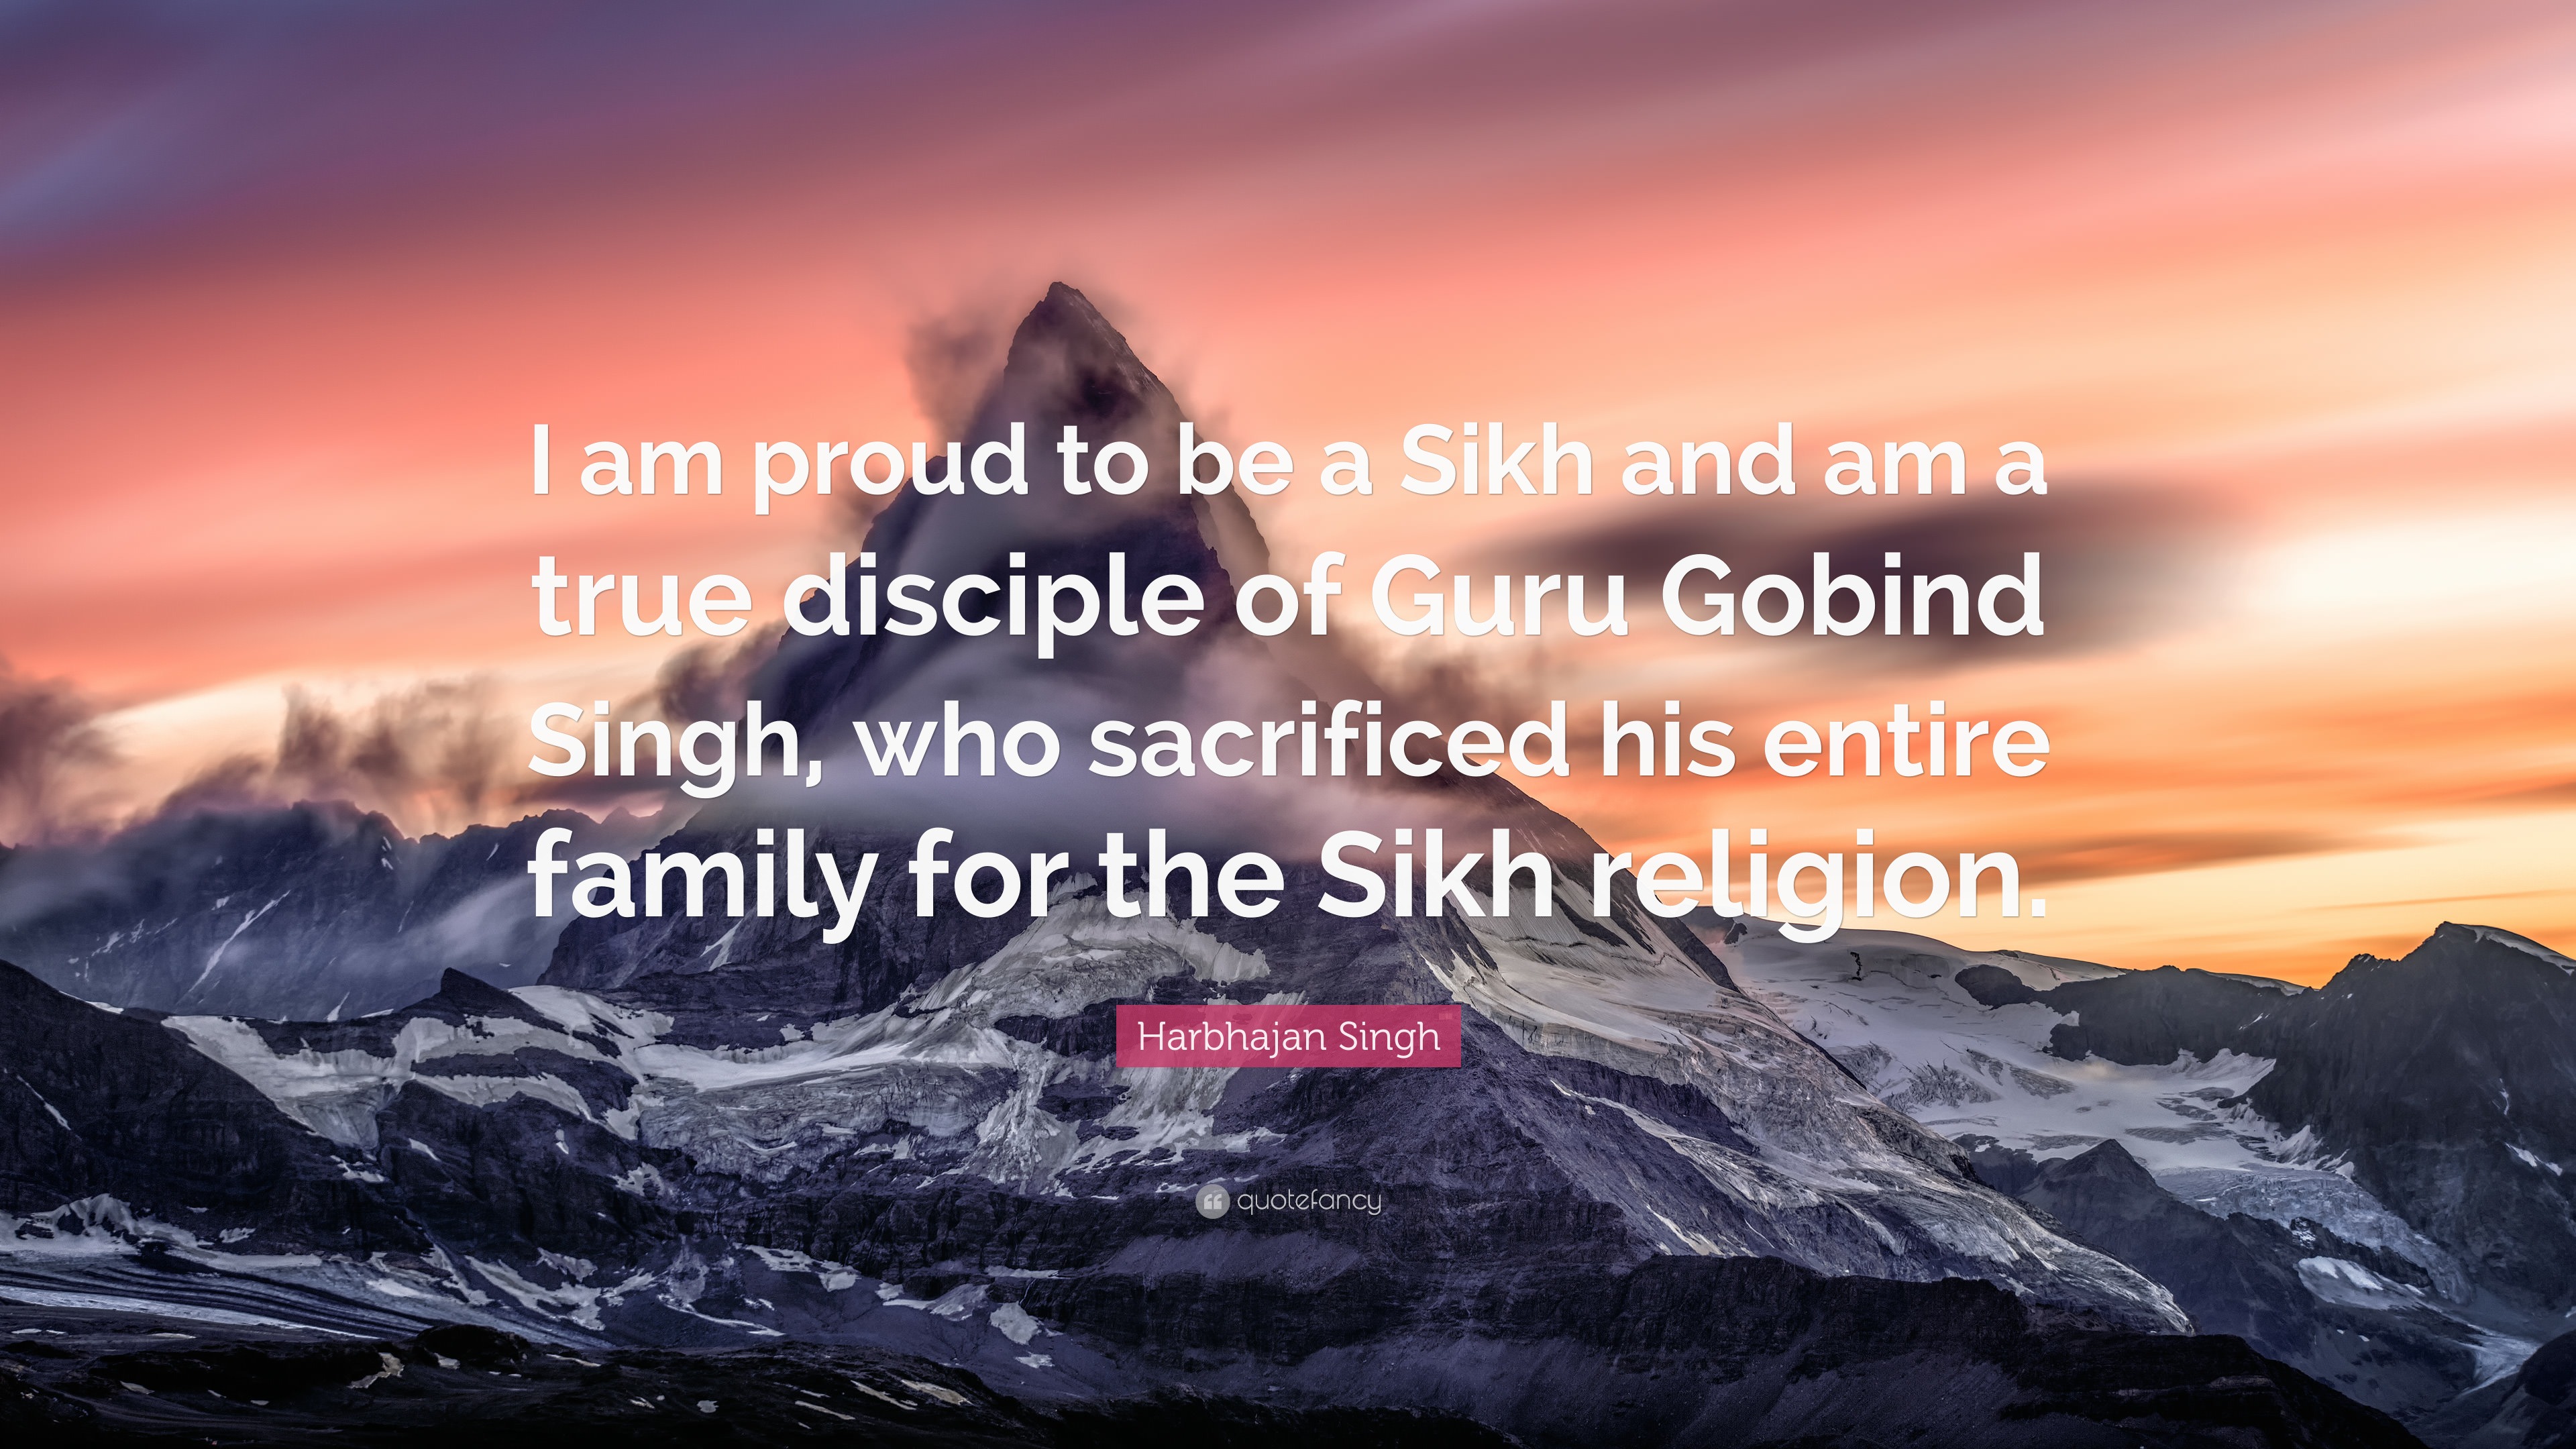 Harbhajan Singh Quote: “I am proud to be a Sikh and am a ...
 True Sikh Quotes